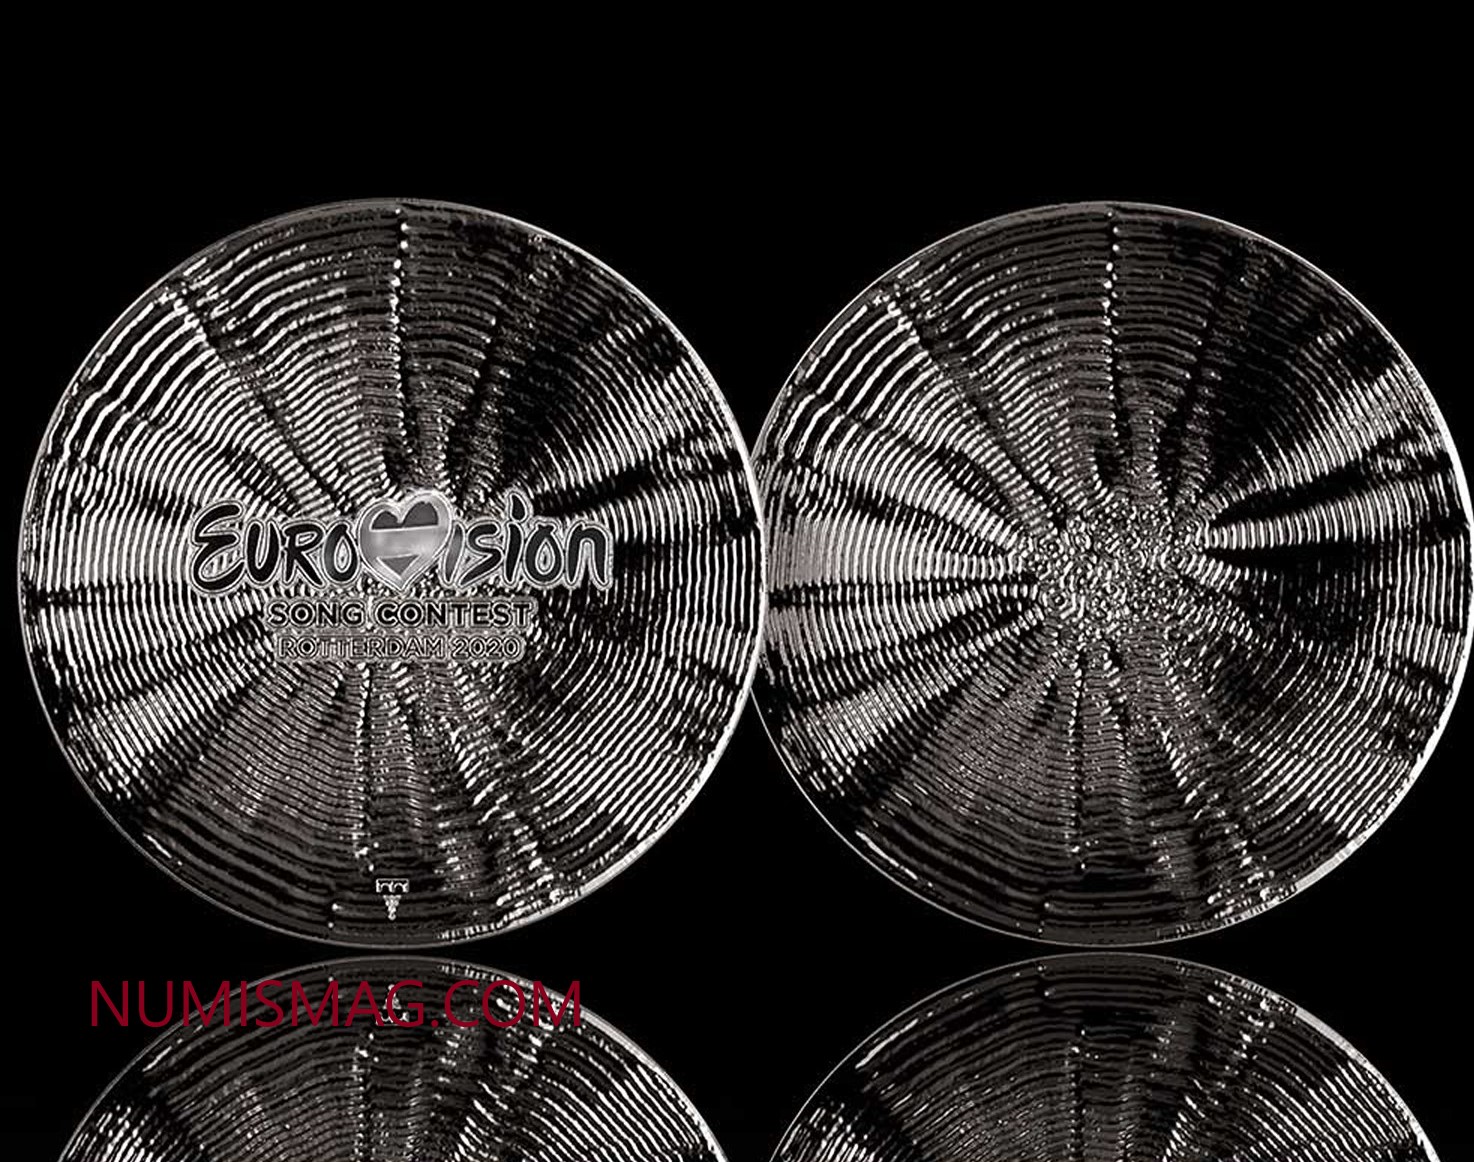 In 2020, Netherlands celebrate Eurovision song contest with a coin!